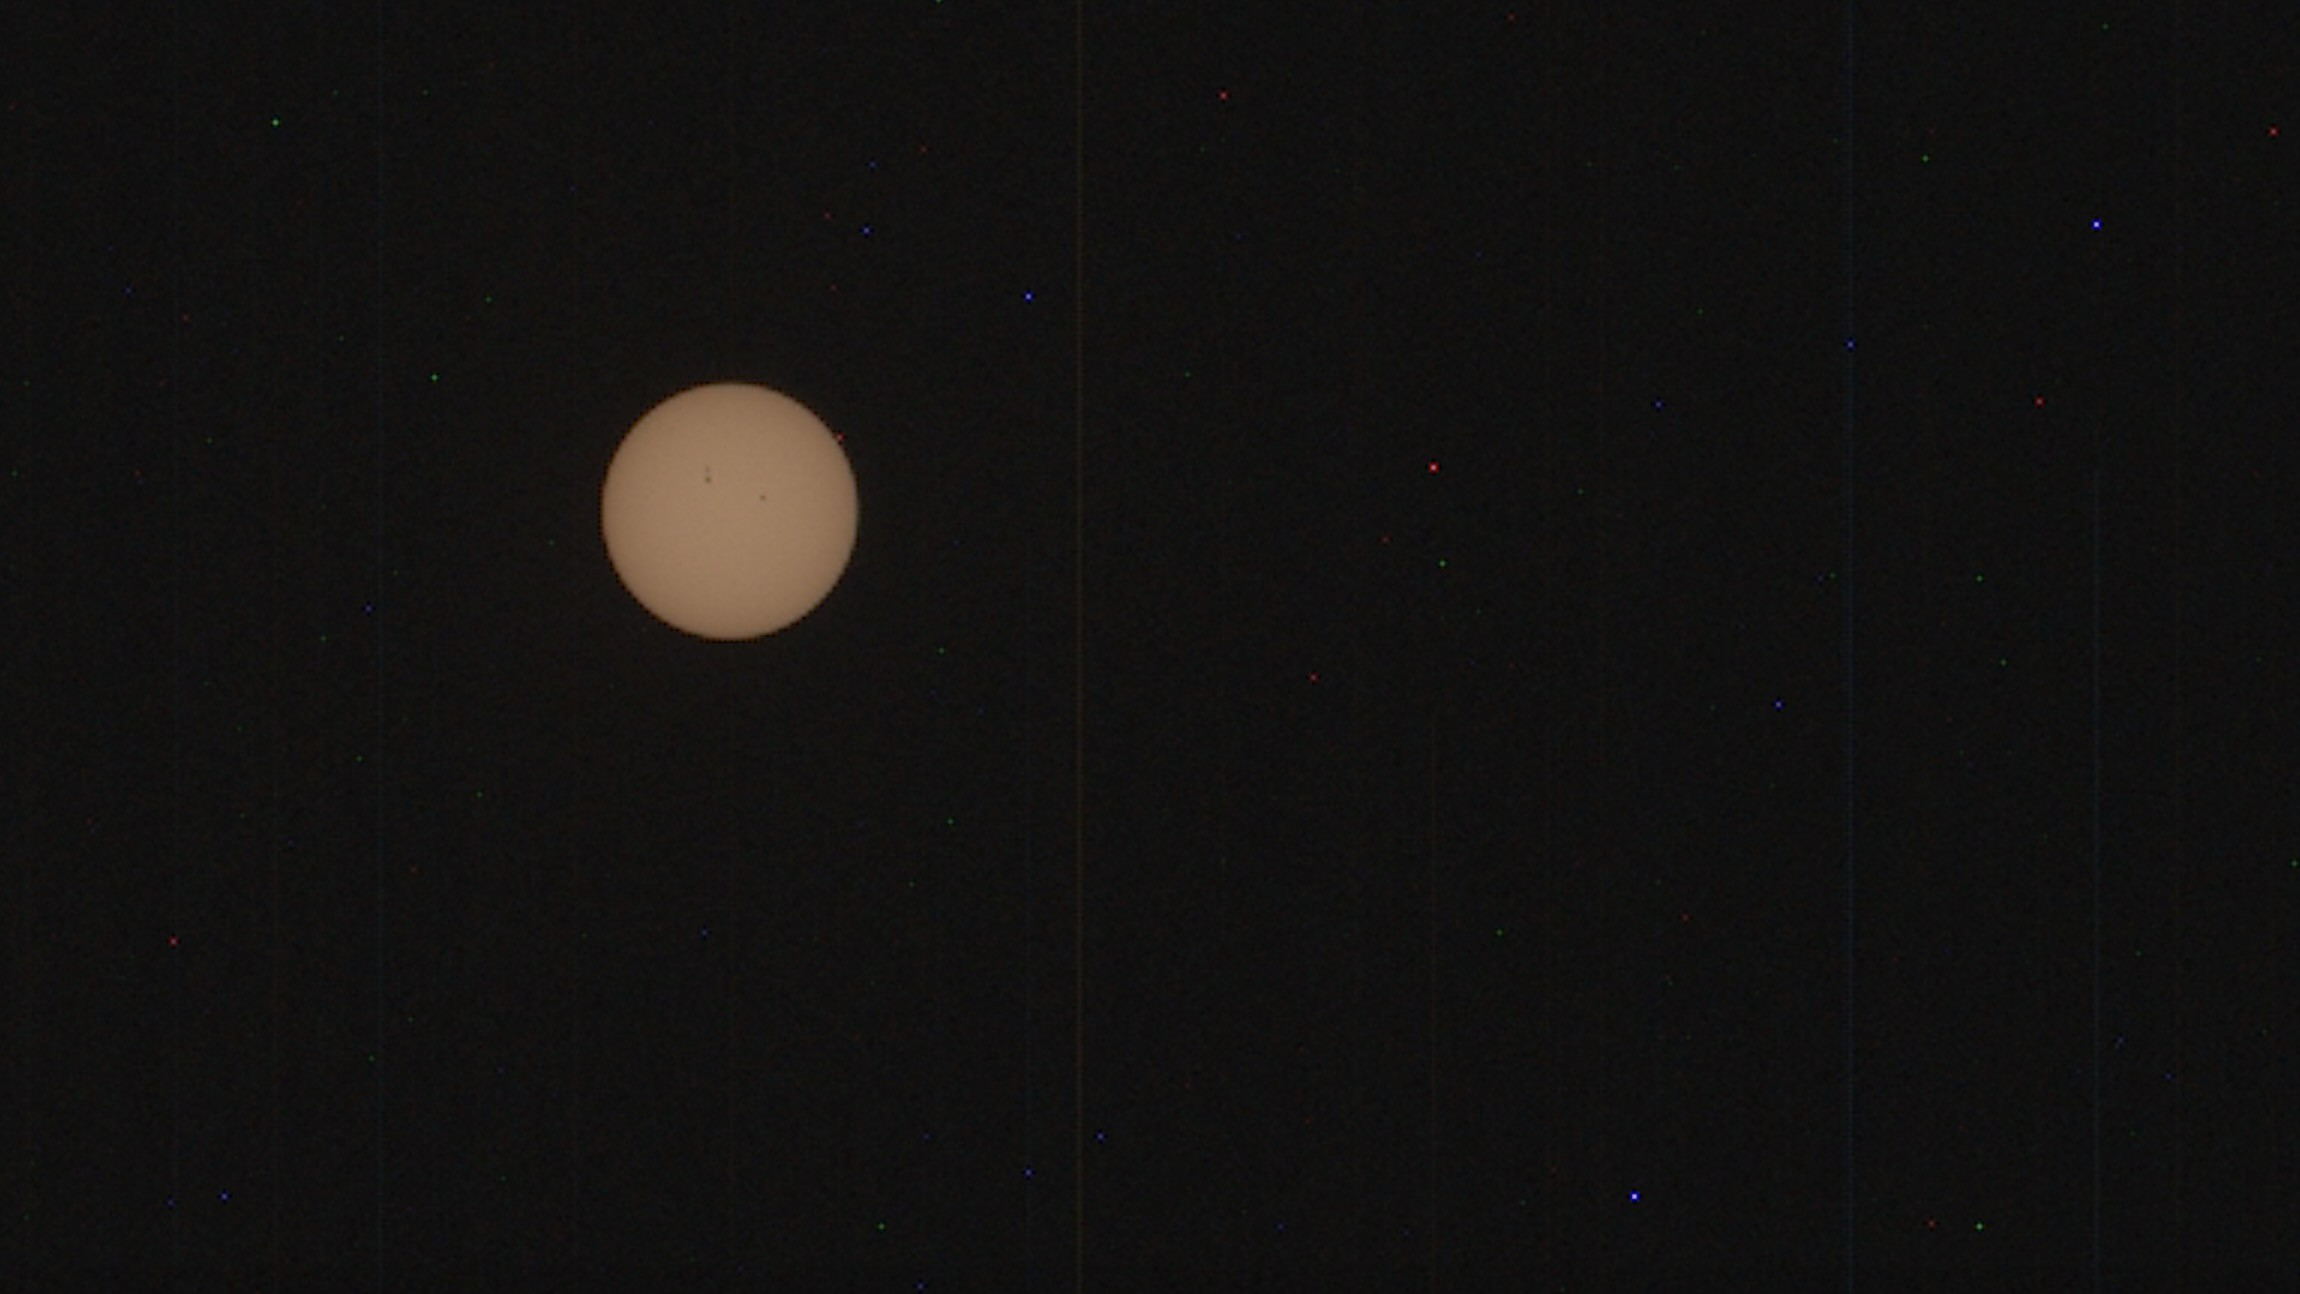 Image of the yellow solar disk against a black sky, captured from afar.